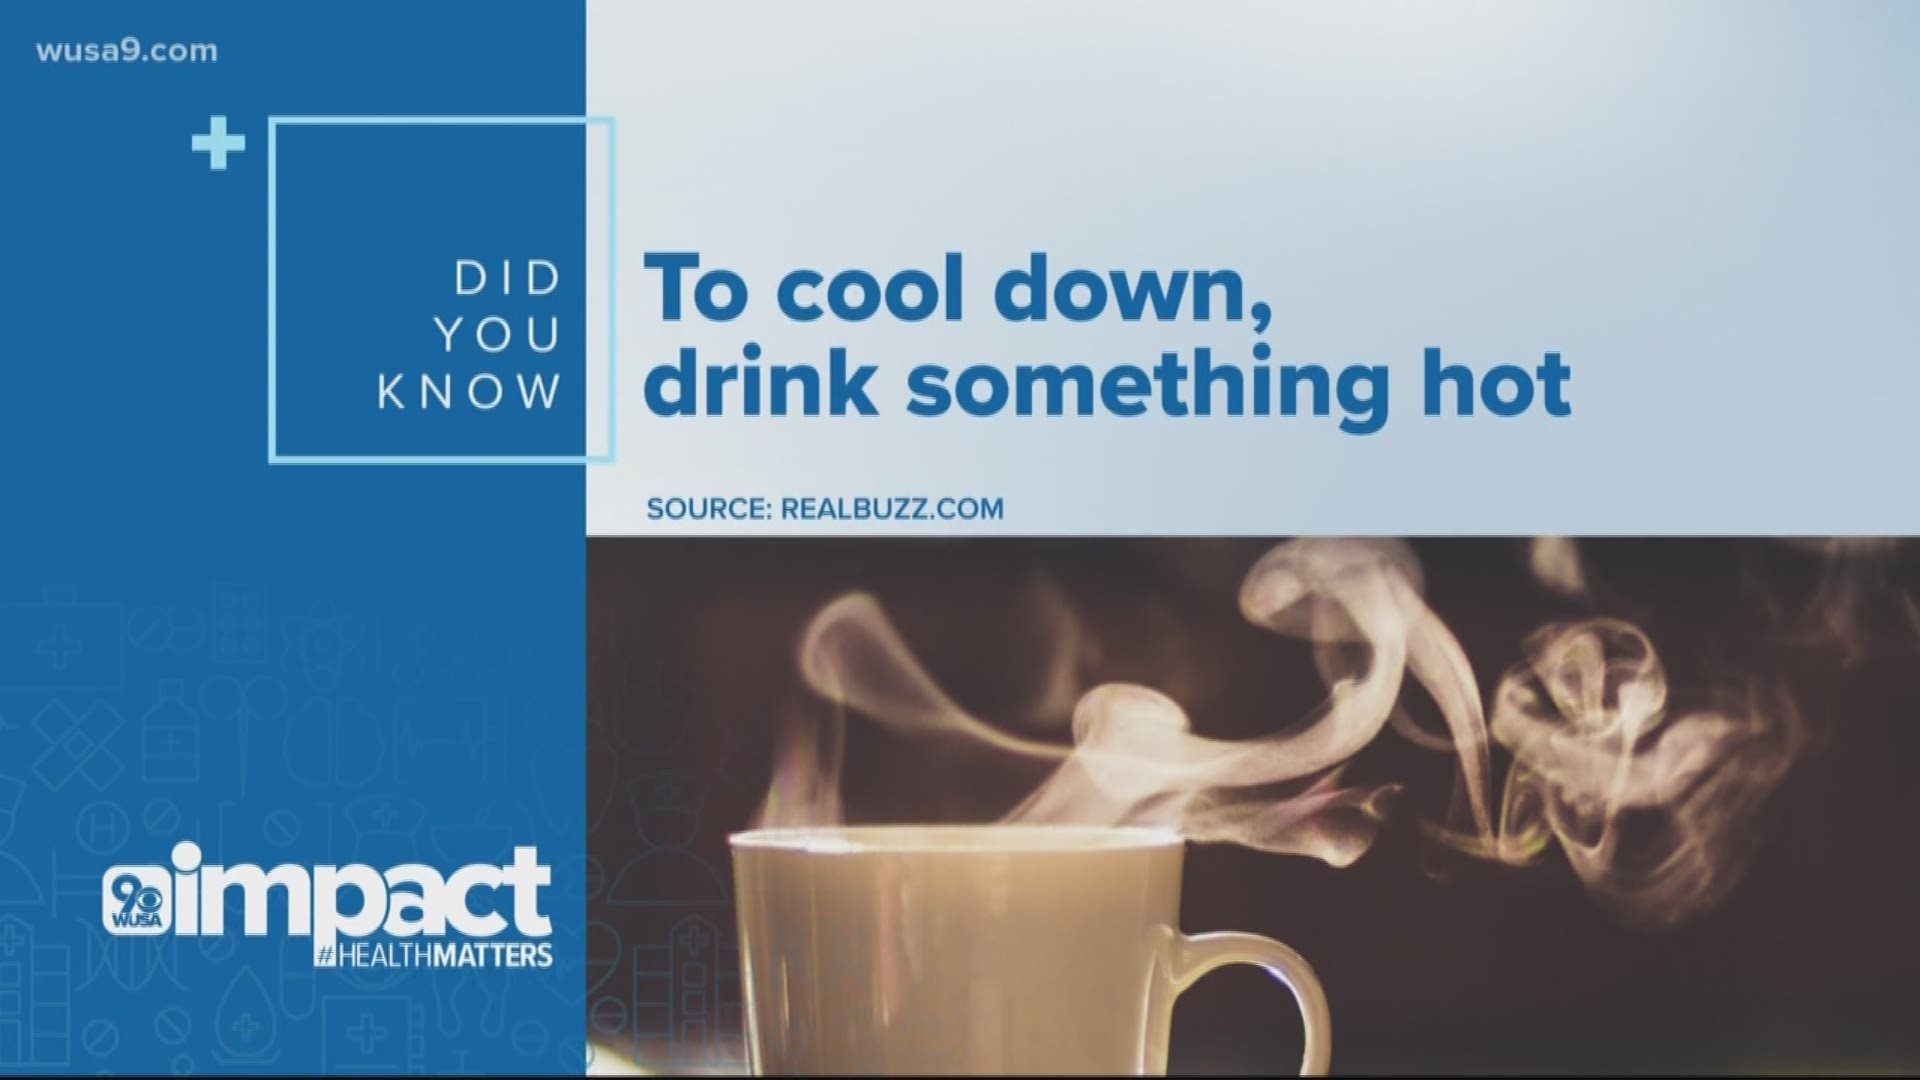 IT MIGHT SOUND COUNTER-PRODUCTIVE, BUT IF YOU WANT TO COOL DOWN, THEN DRINK SOMETHING HOT.